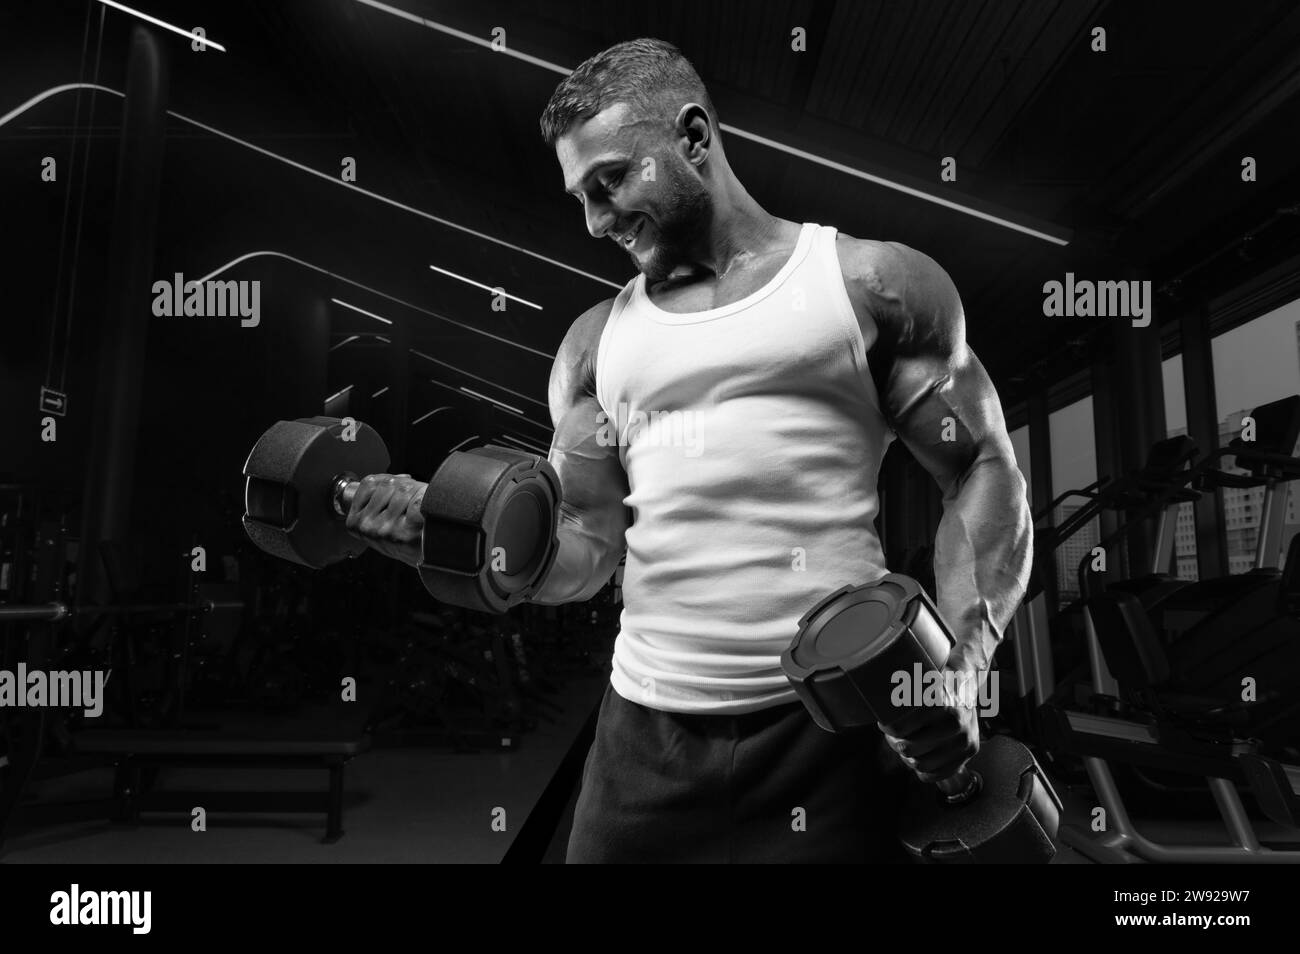 Muscular man in a white t-shirt works out in the gym with dumbbells. Biceps pumping. Fitness and bodybuilding concept. Mixed media Stock Photo